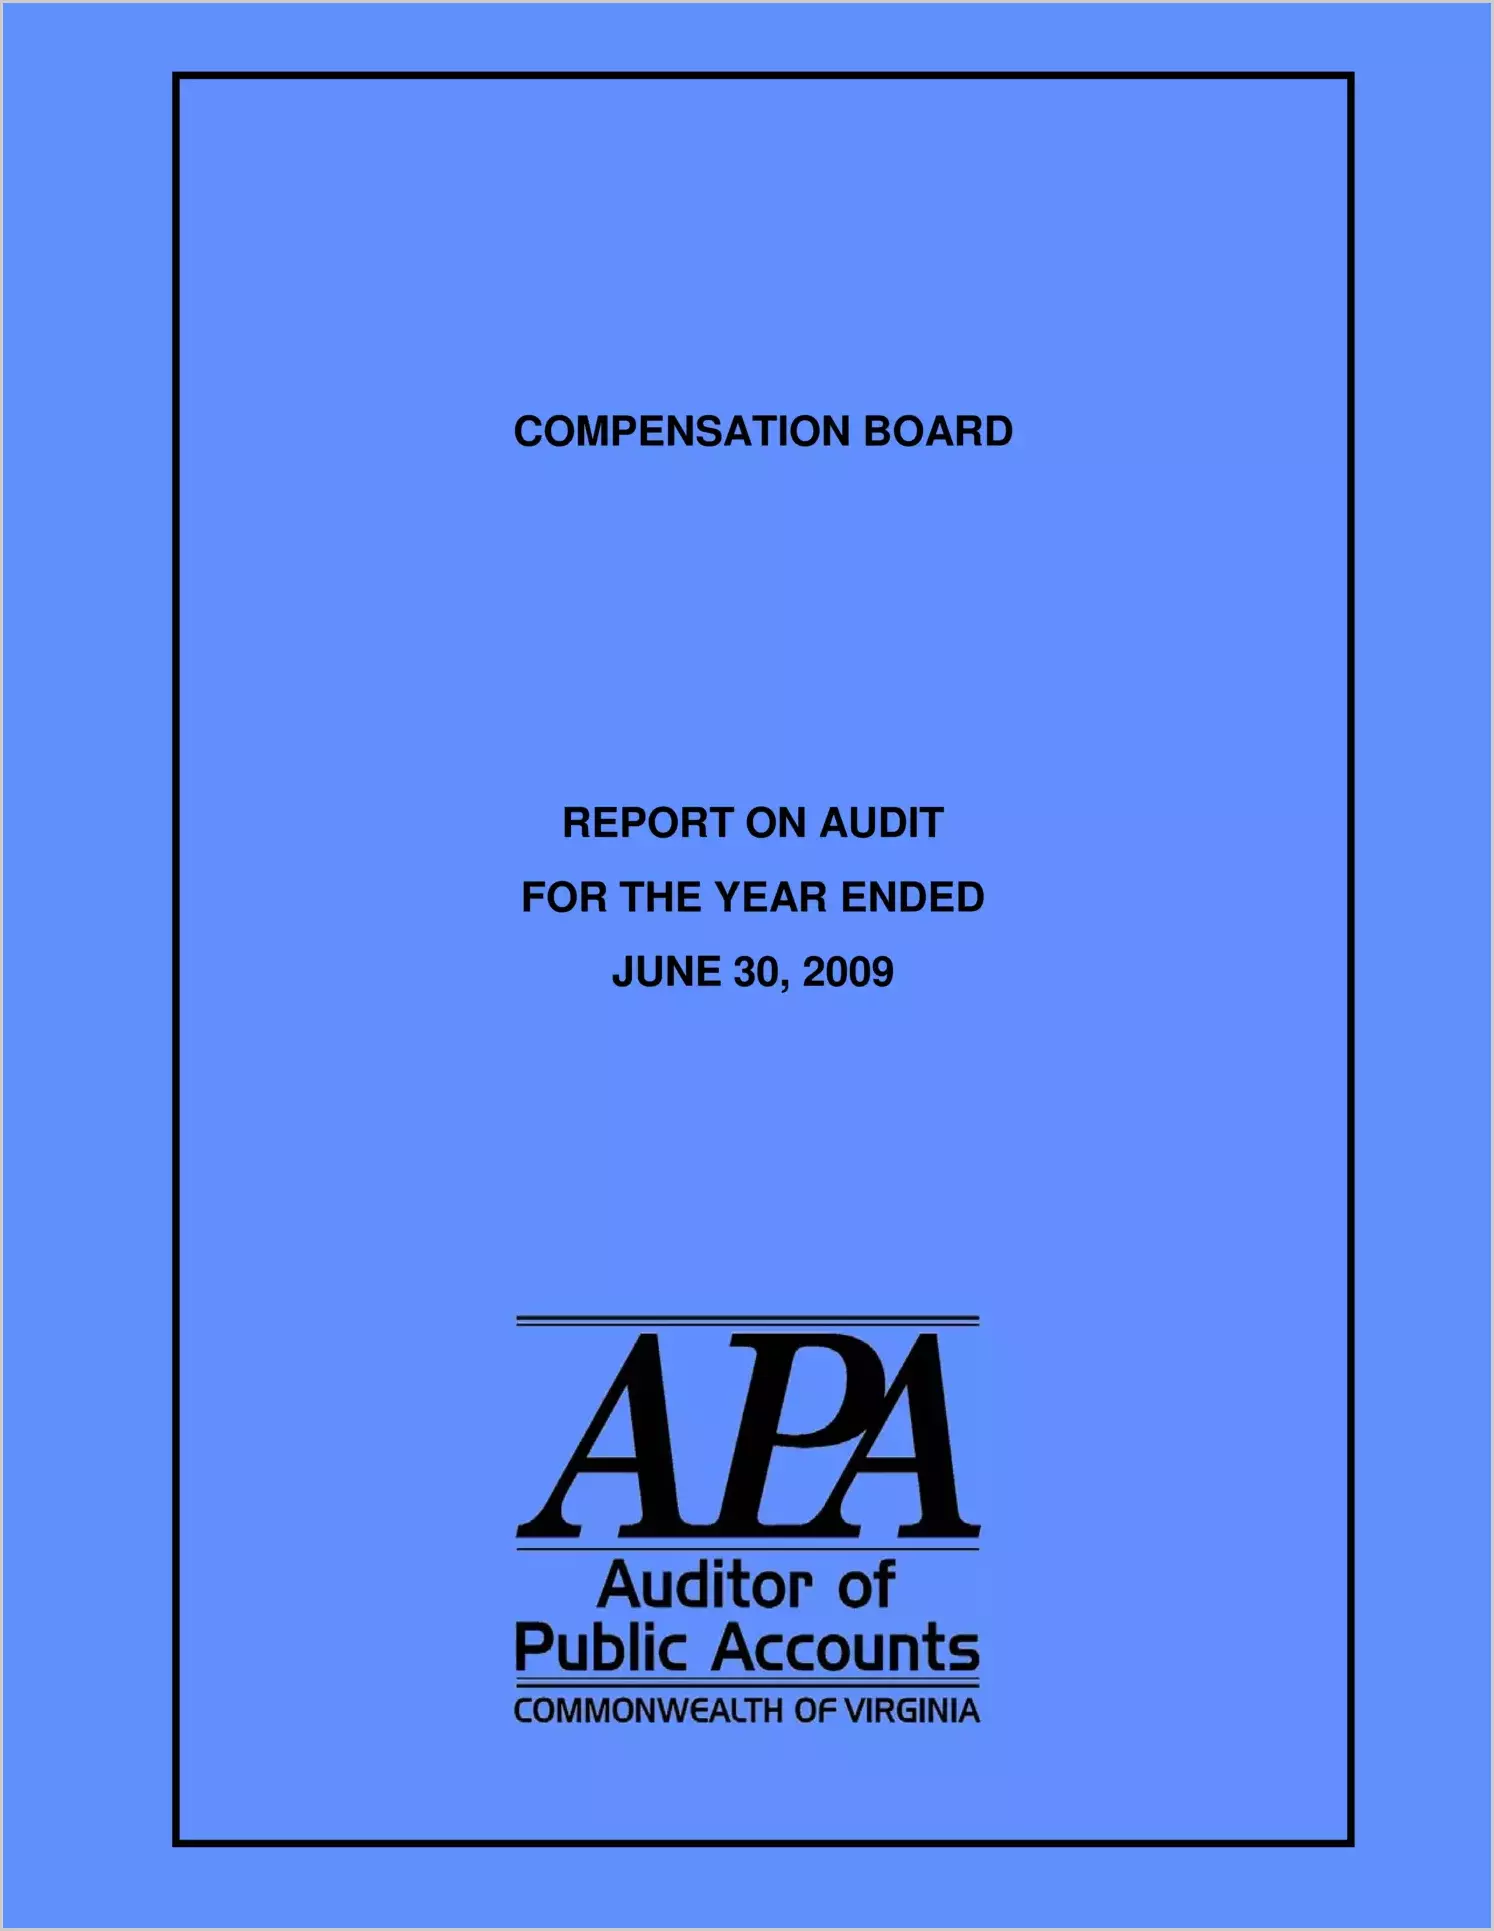 Compensation Board Report on Audit for the Year Ended June 30, 2009